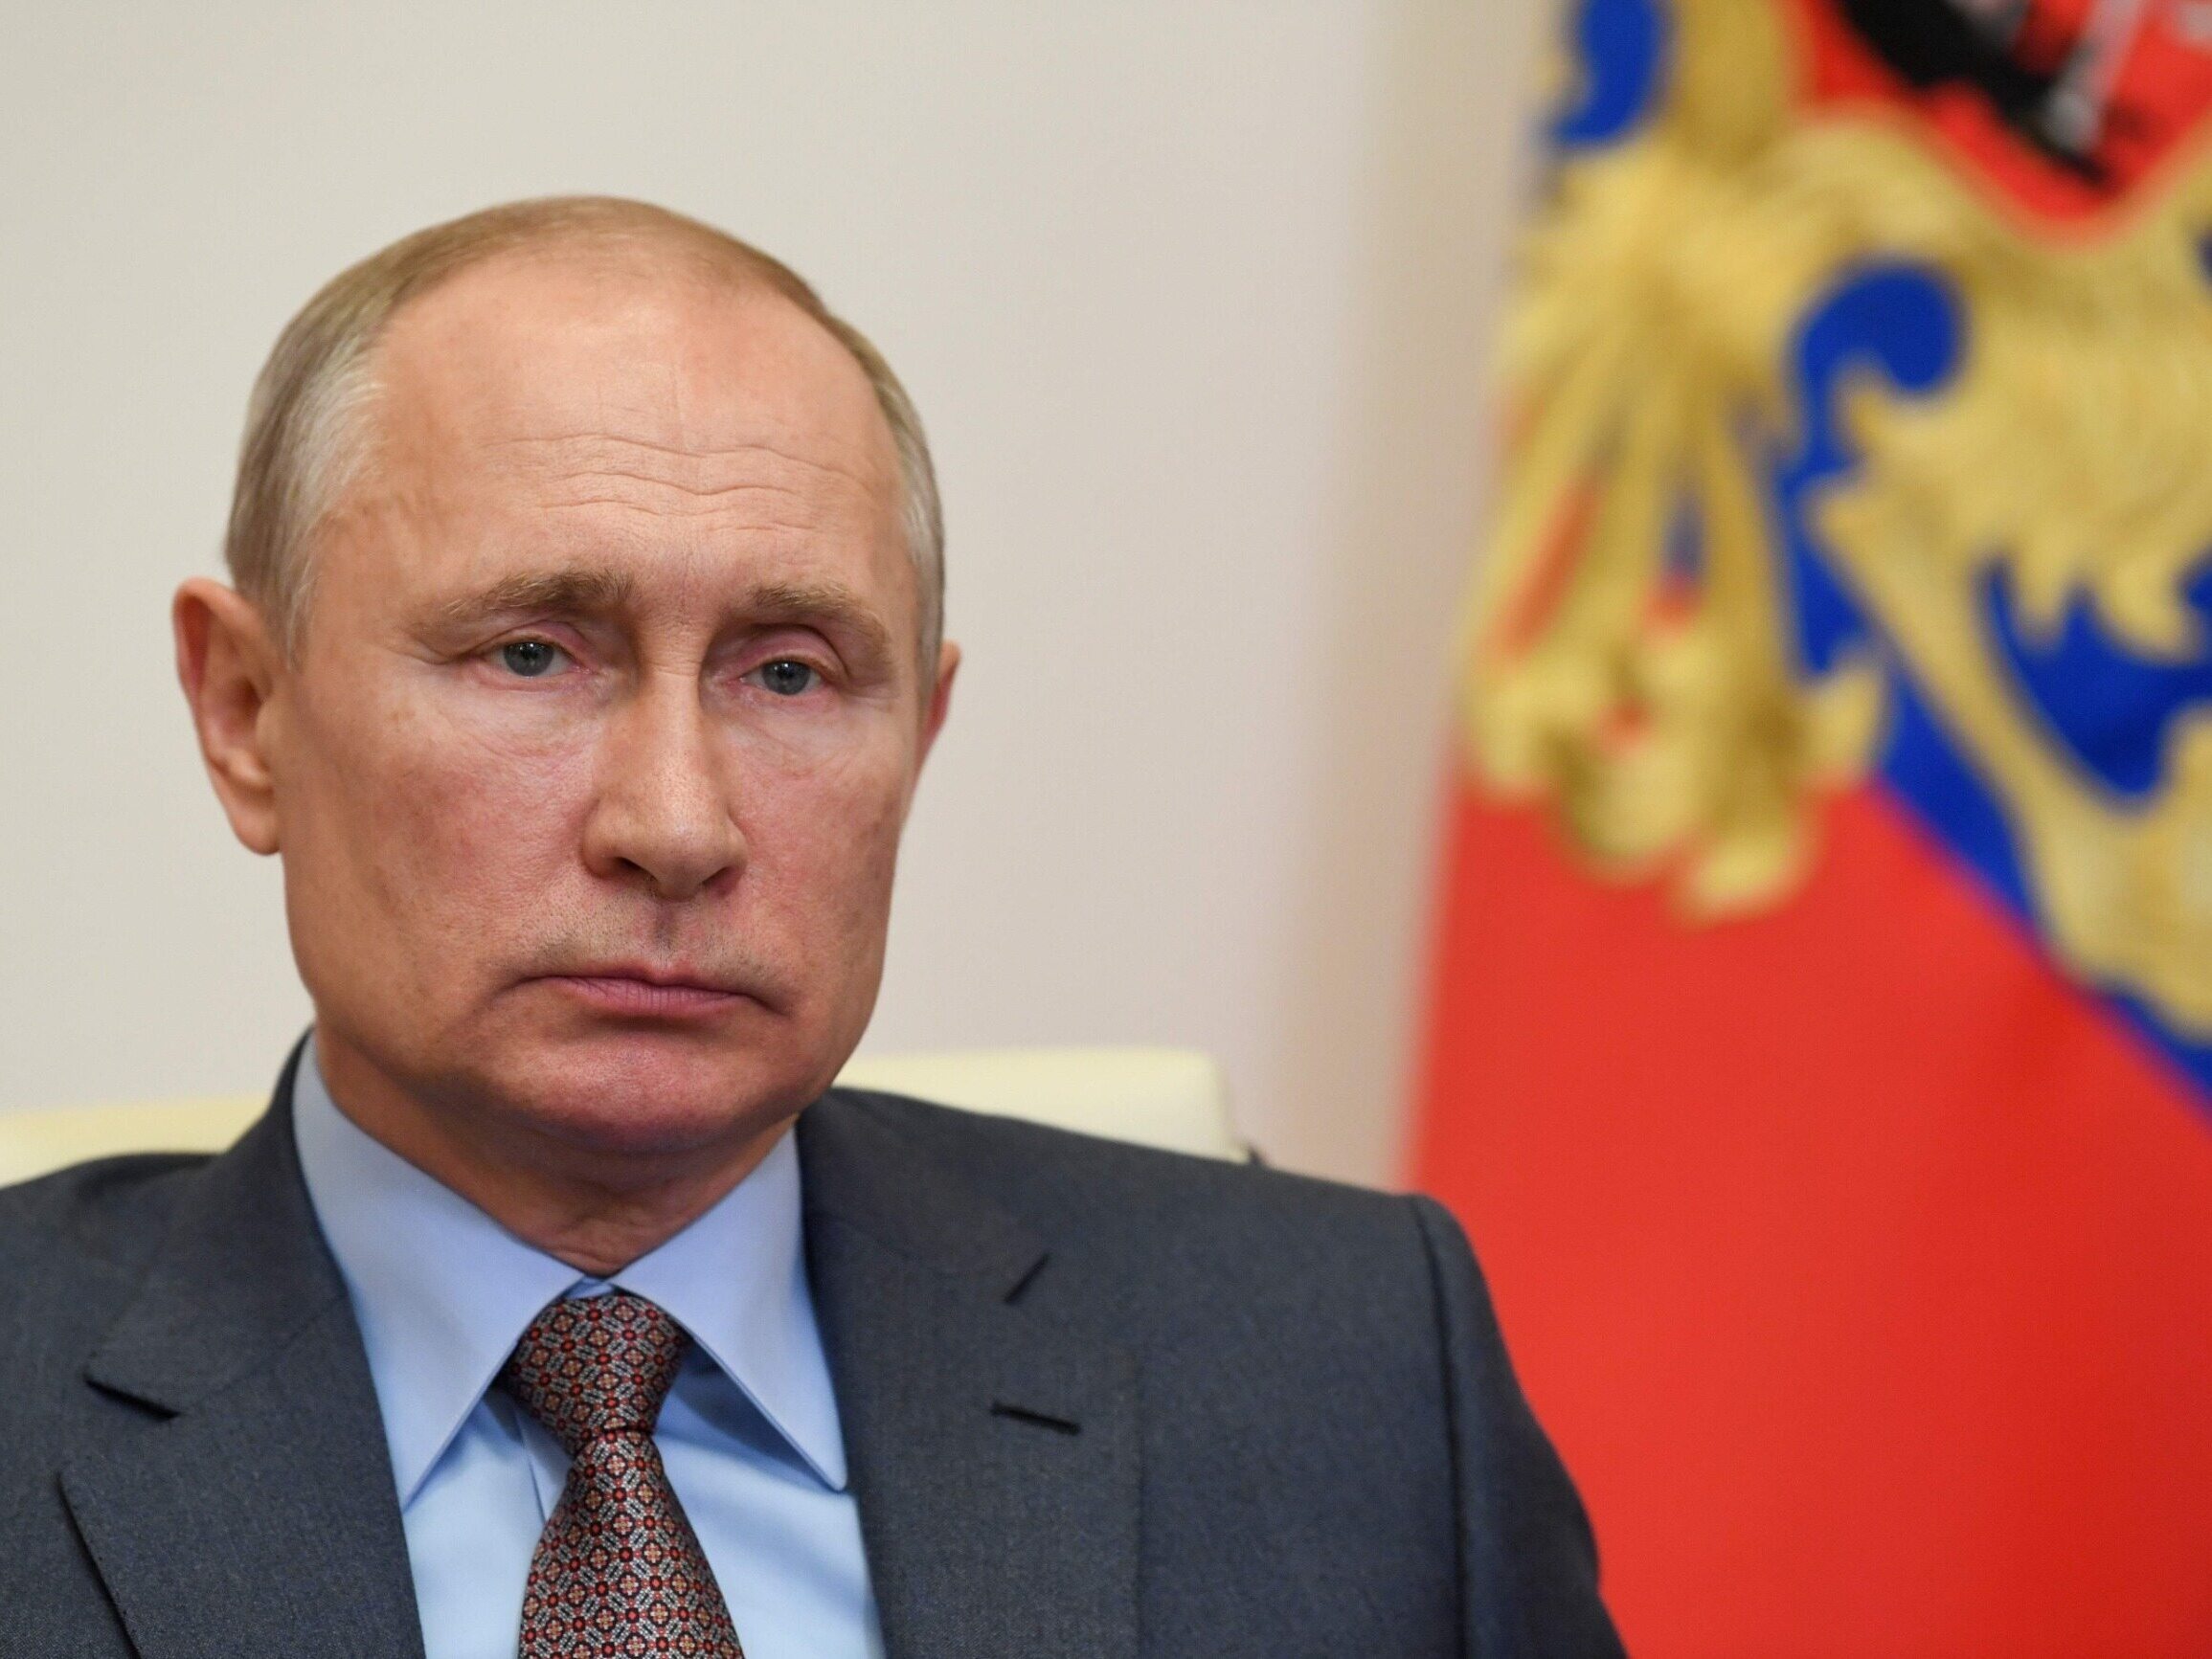 Has Vladimir Putin become even more dangerous?  "There's Nothing to Lose"